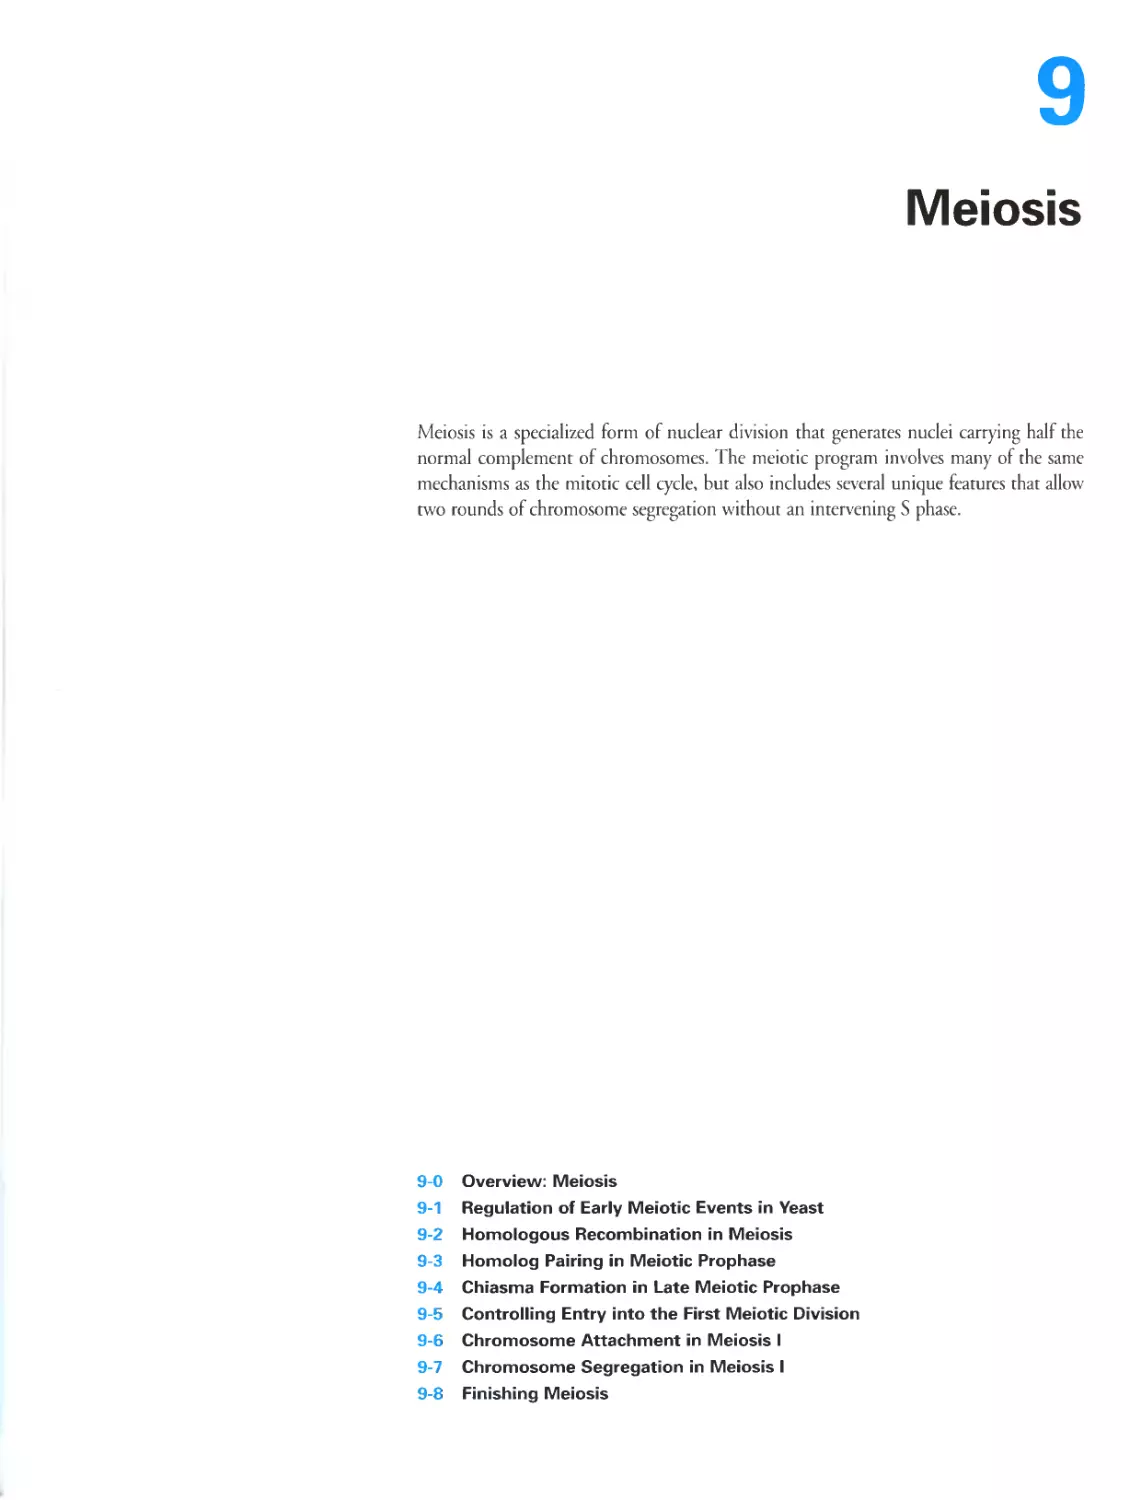 Chapter 9. Meiosis